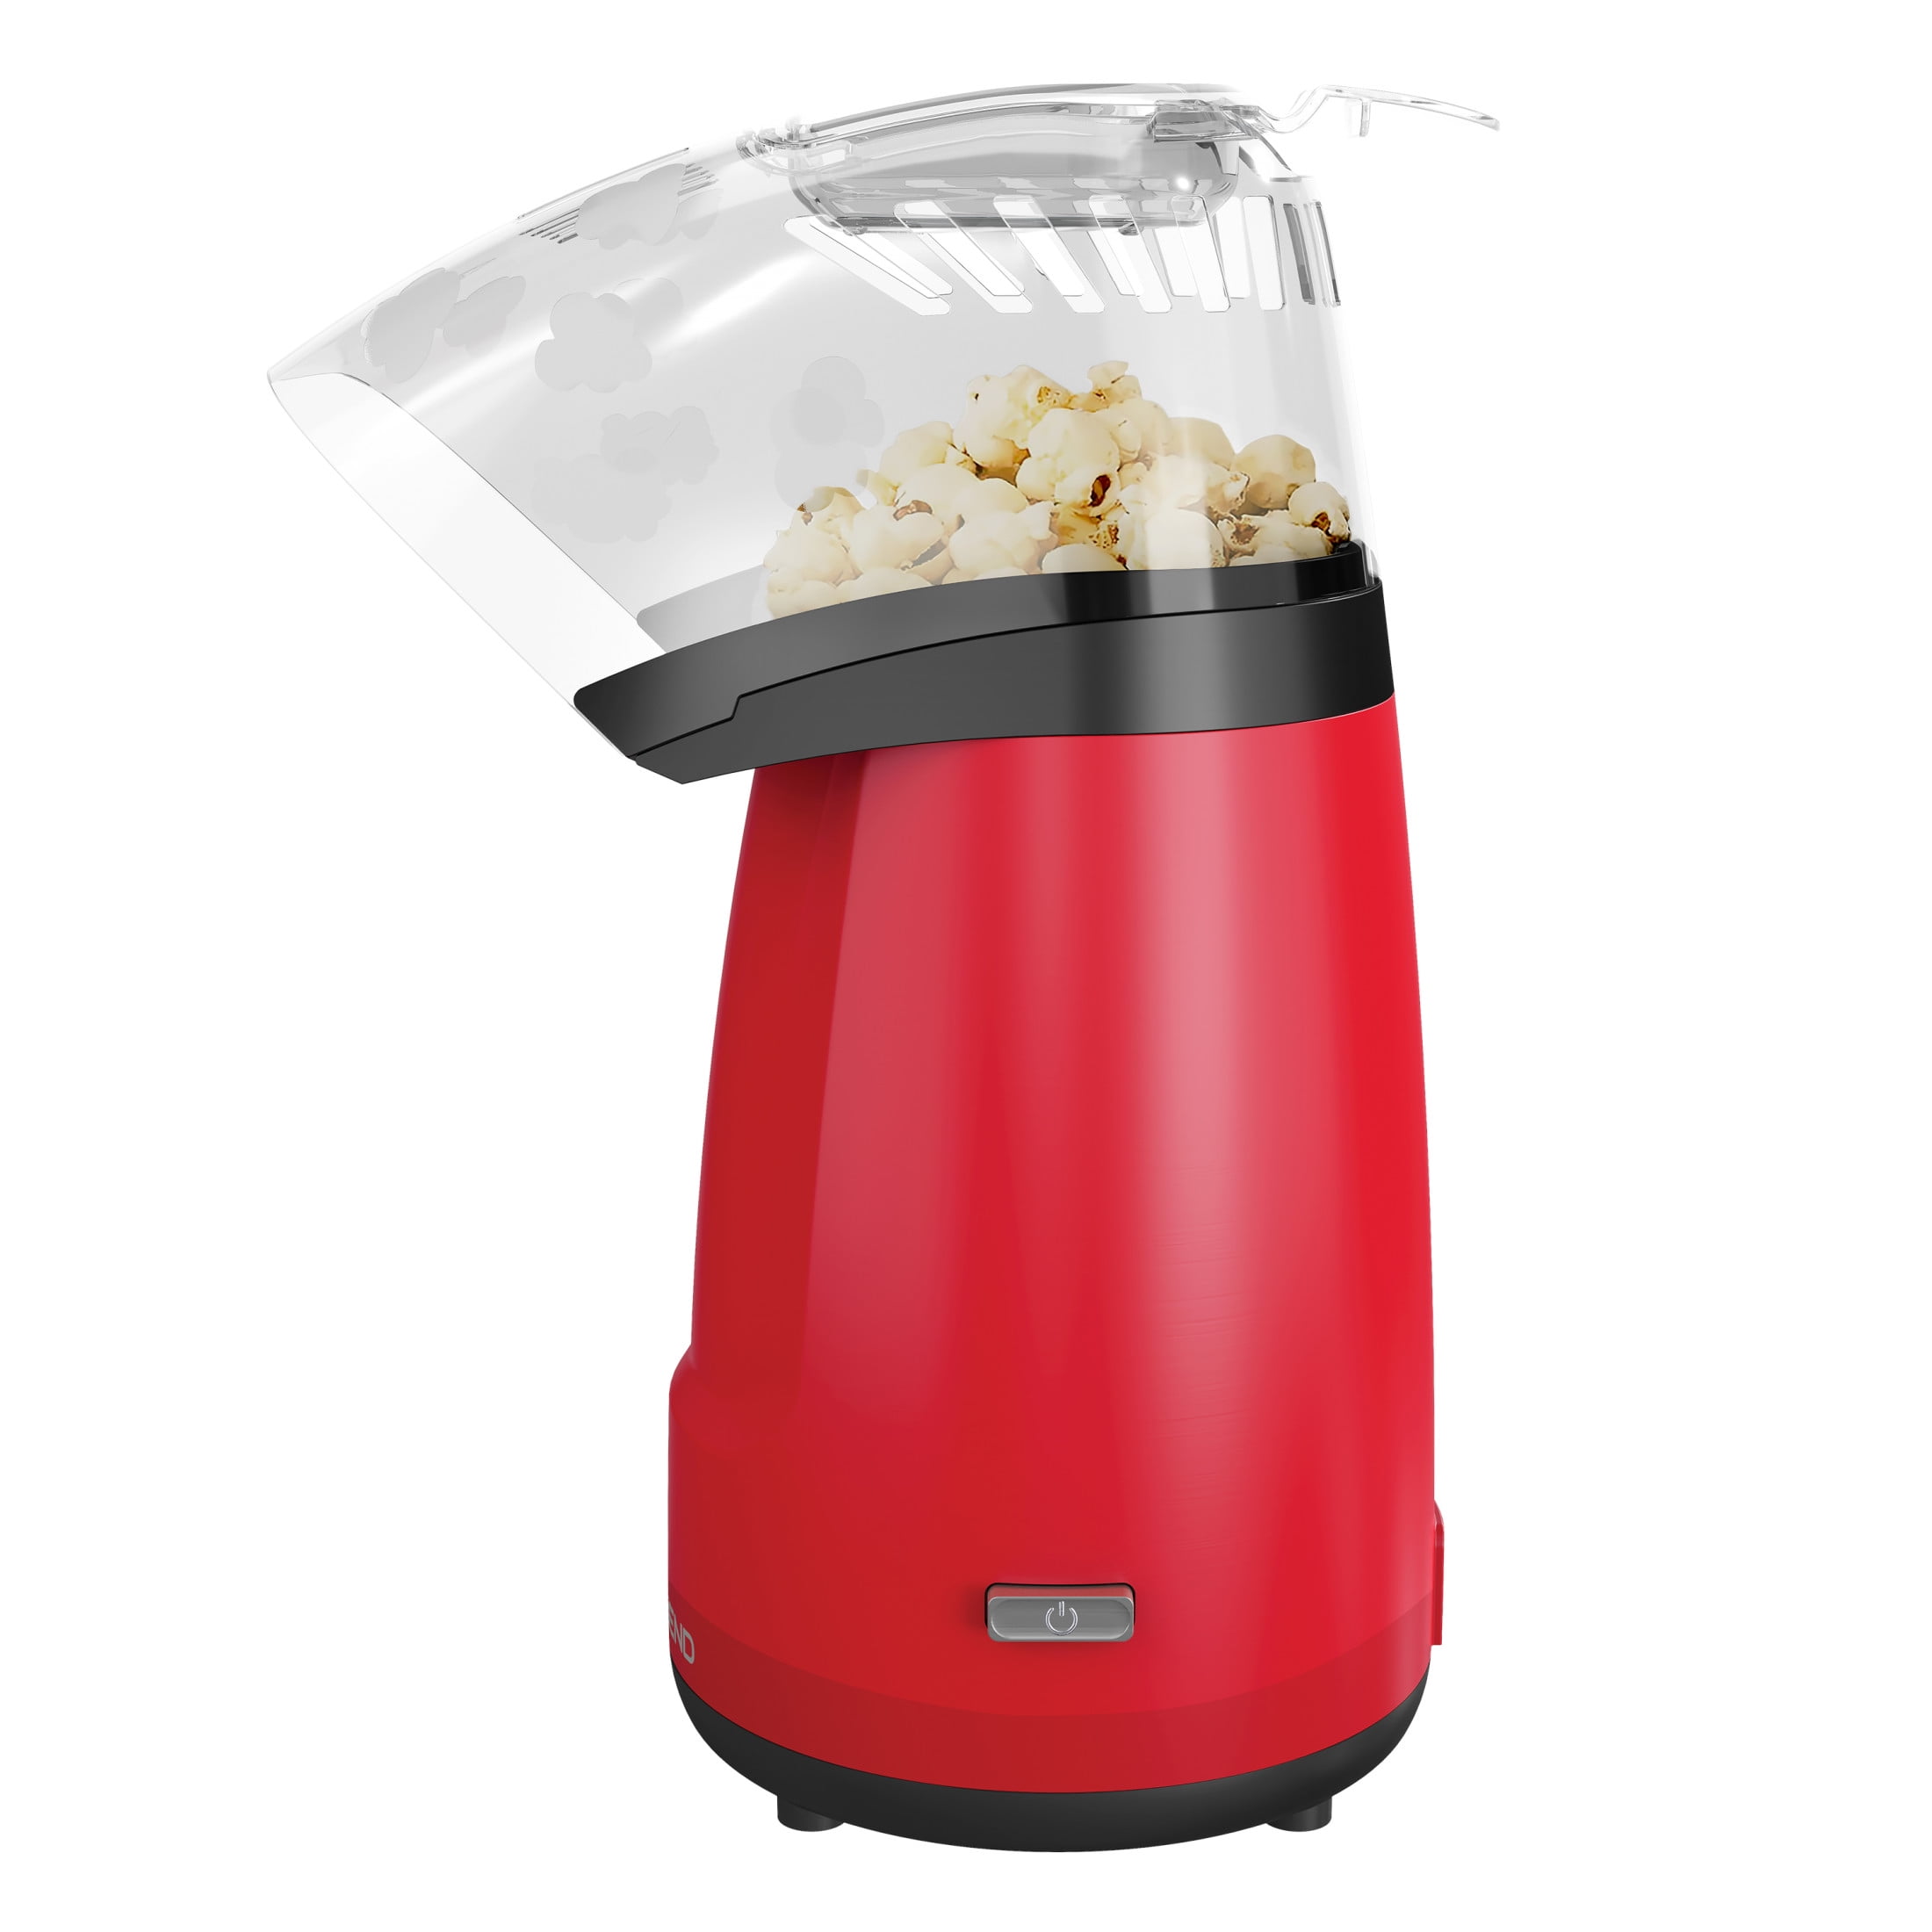 West Bend 16 Cup Air Crazy Popcorn Maker in Red